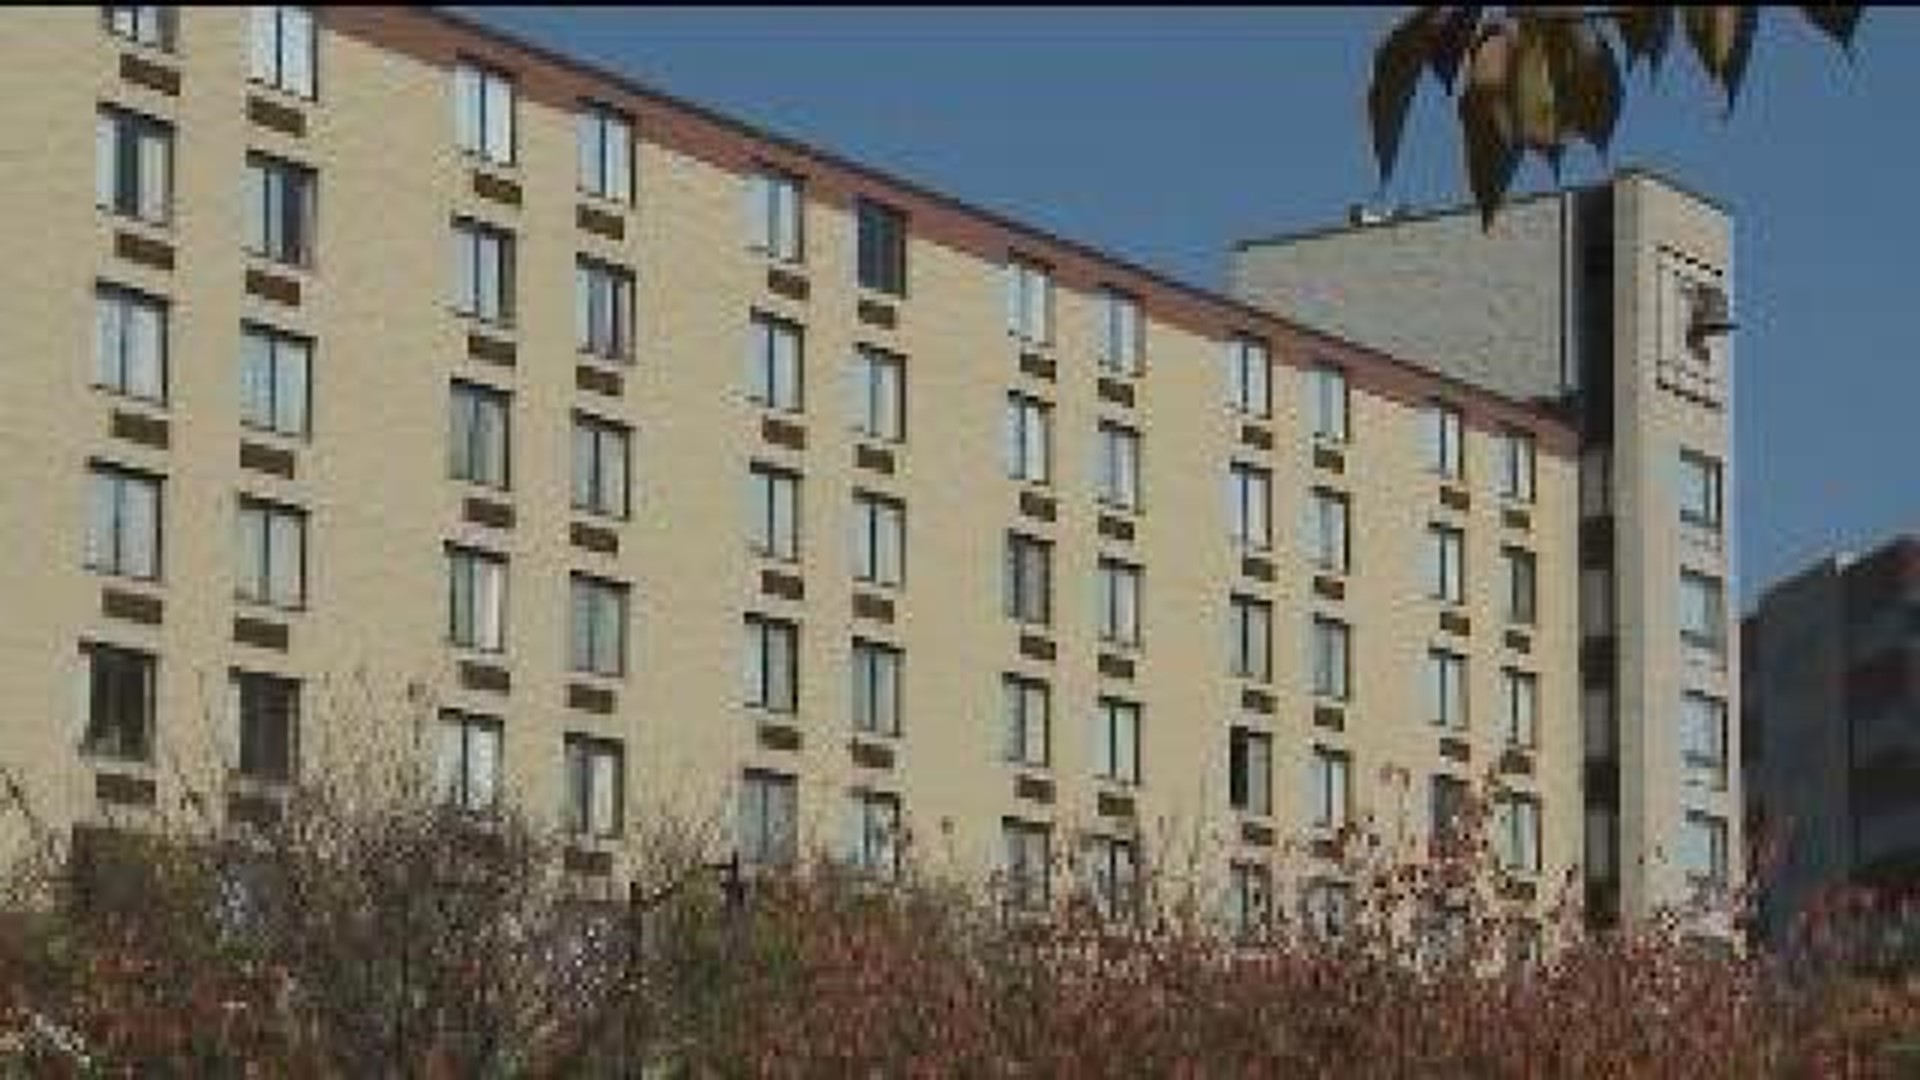 City To Lose Taxes When College Buys Hotel